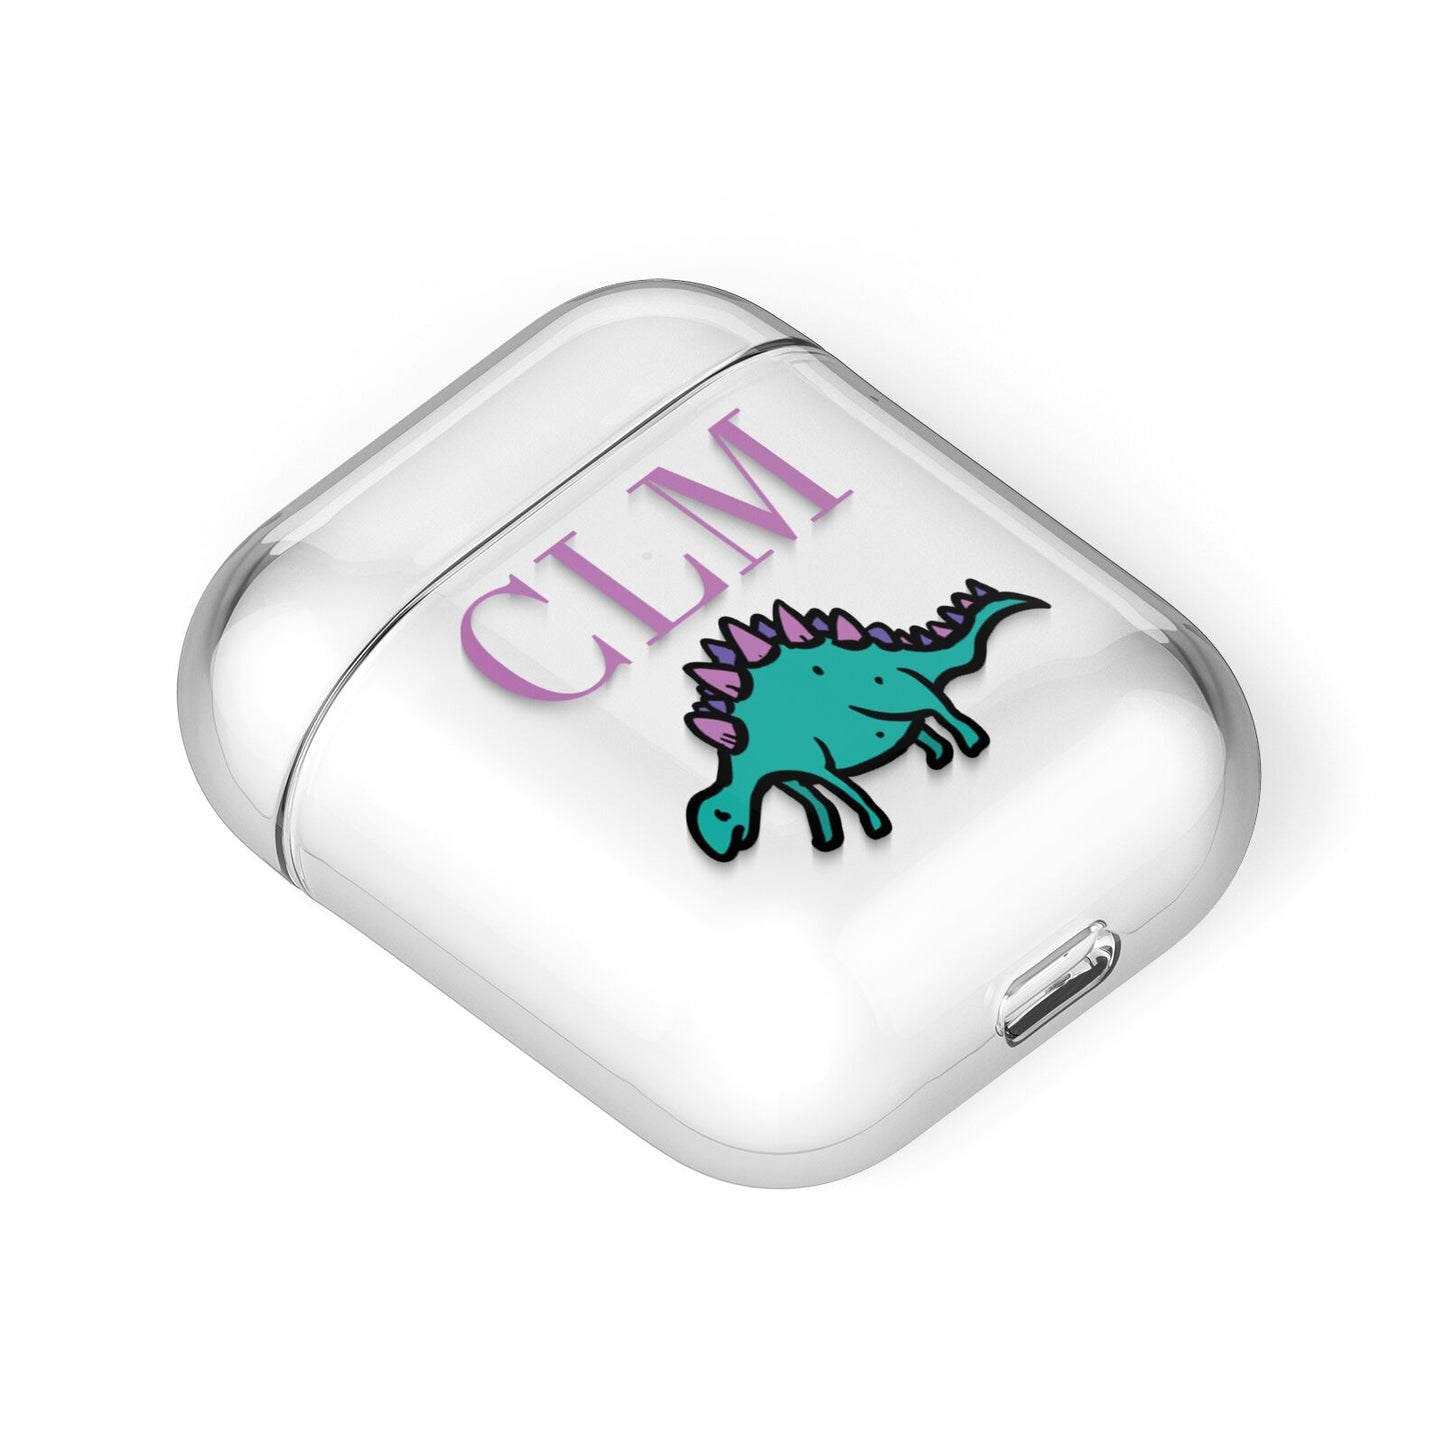 Personalised Dinosaur Monogrammed AirPods Case Laid Flat